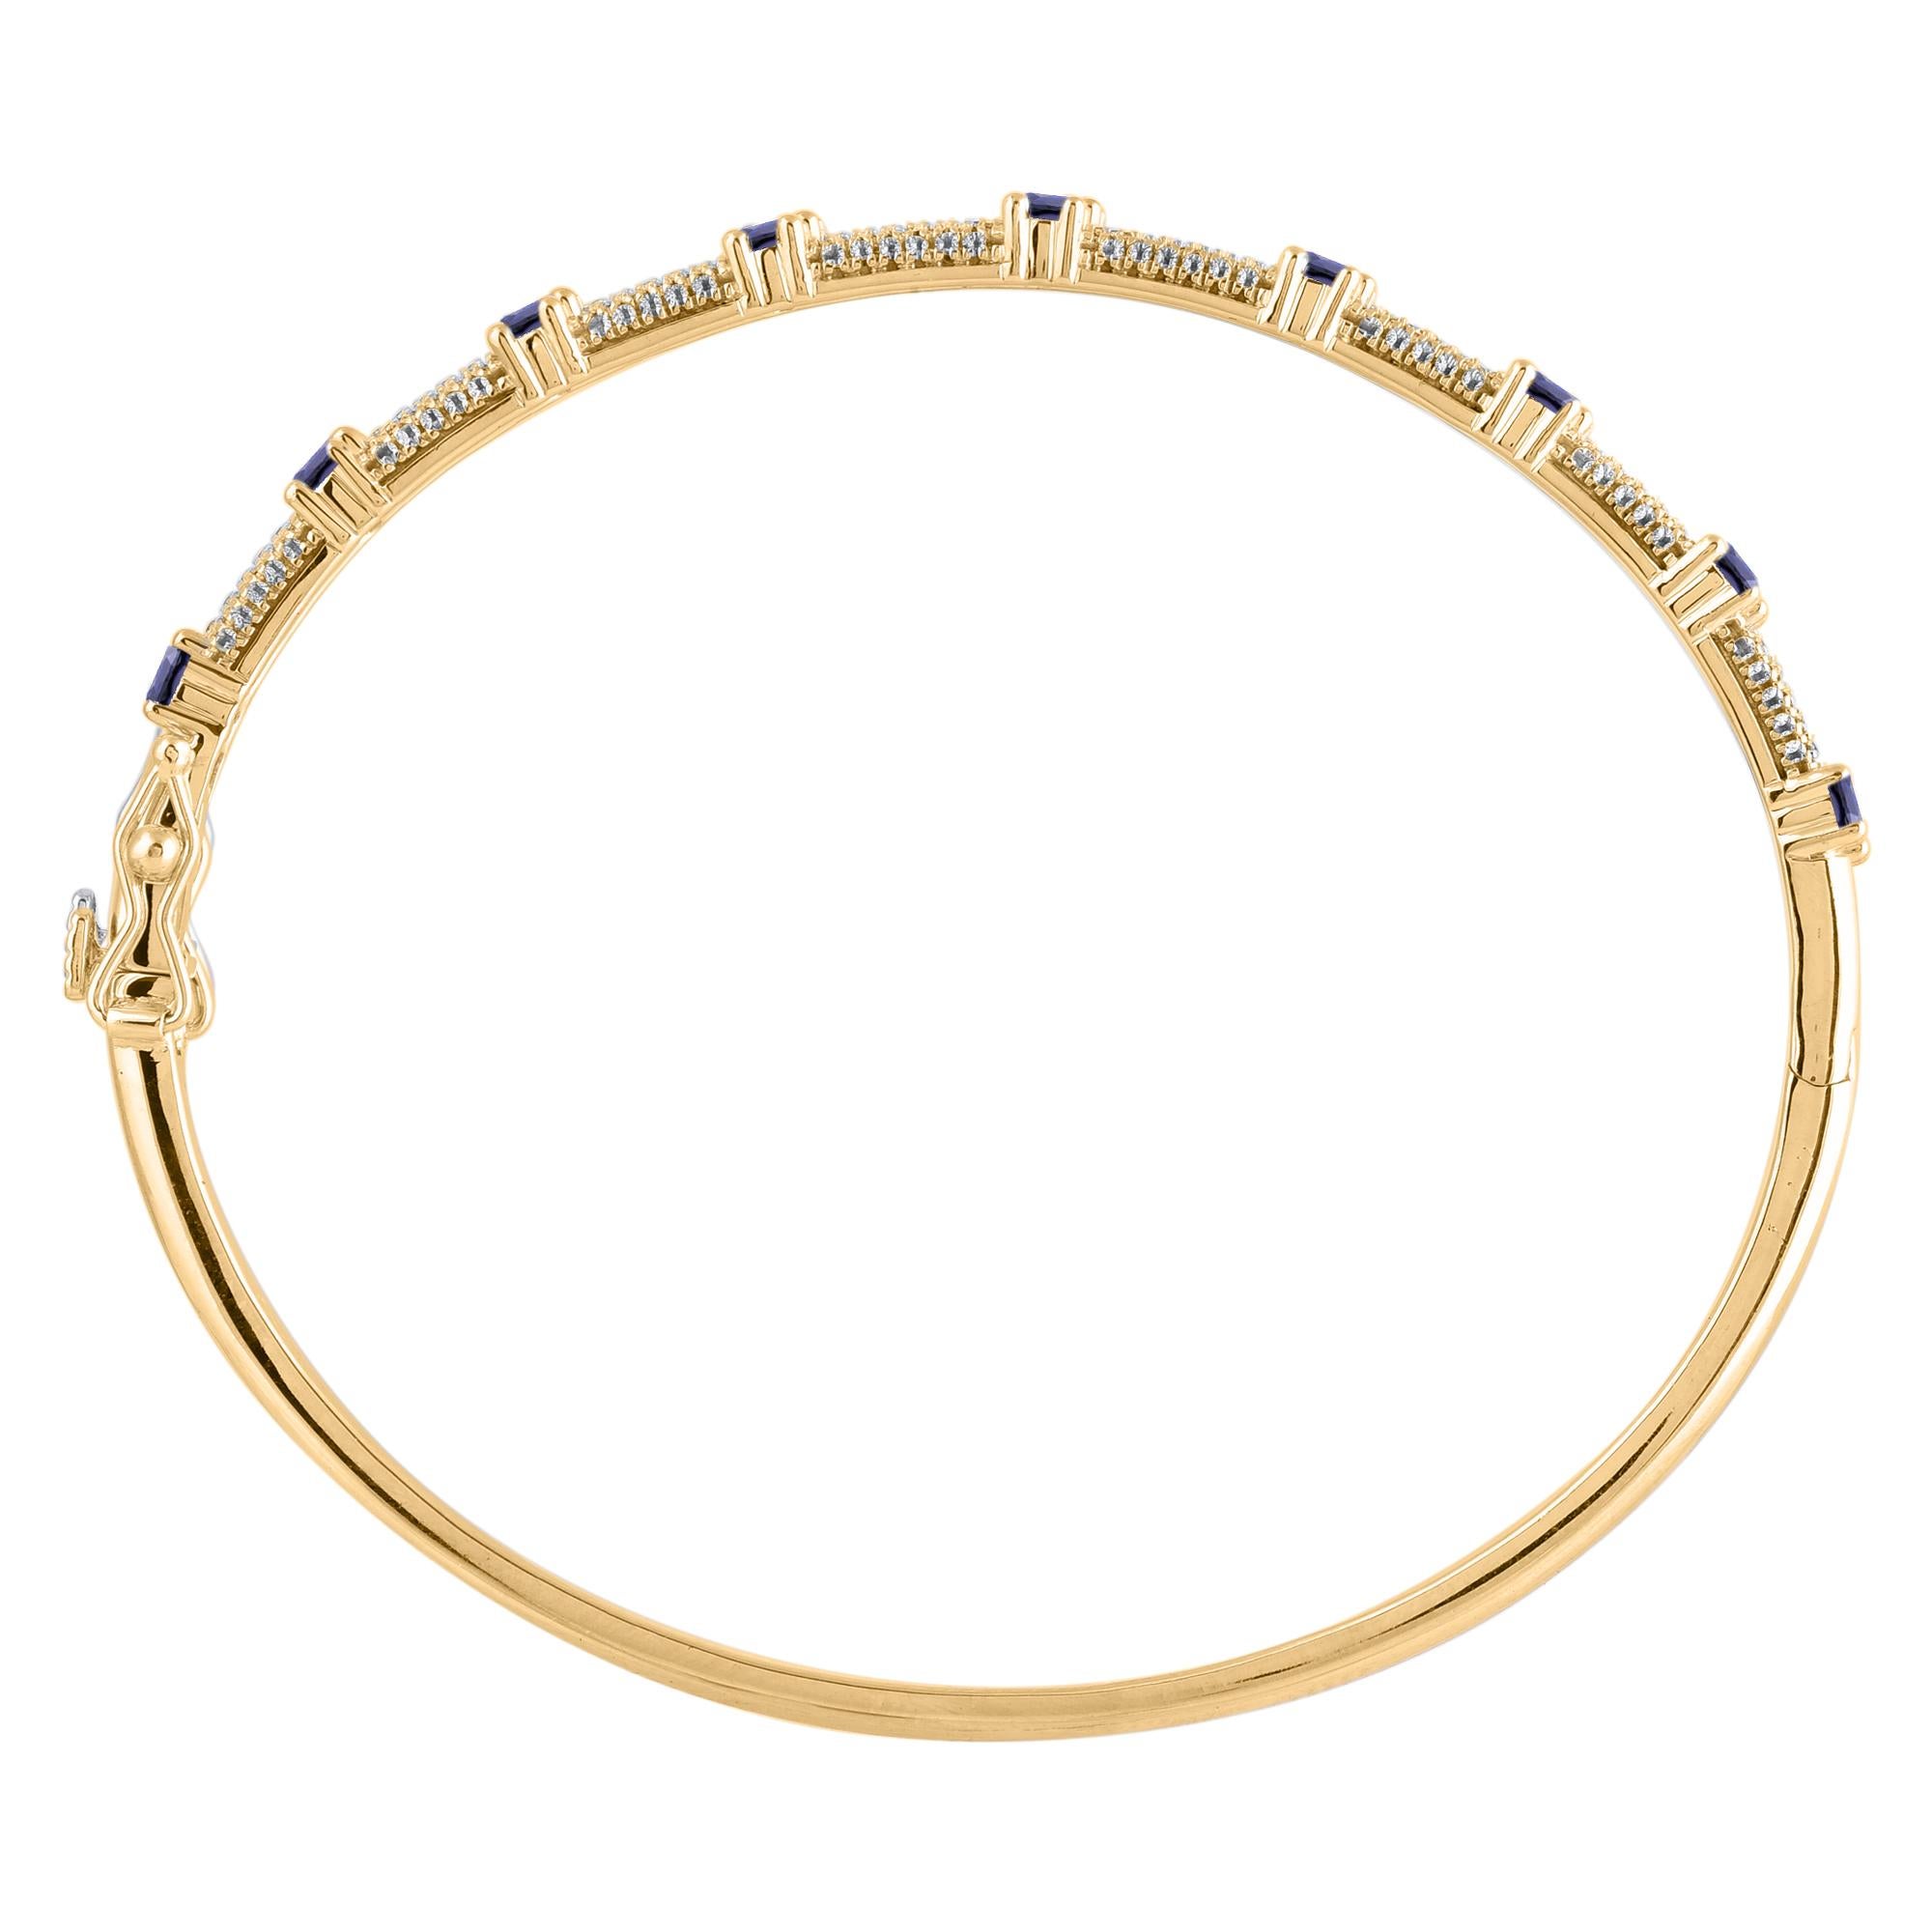 A minimalist look with a pop of color, this blue sapphire and diamond bangle bracelet pairs well with most any attire. This Shimmering bangle bracelet features 134 natural 0.50ct round single cut diamonds and 0.50 carats 9 blue sapphire in prong